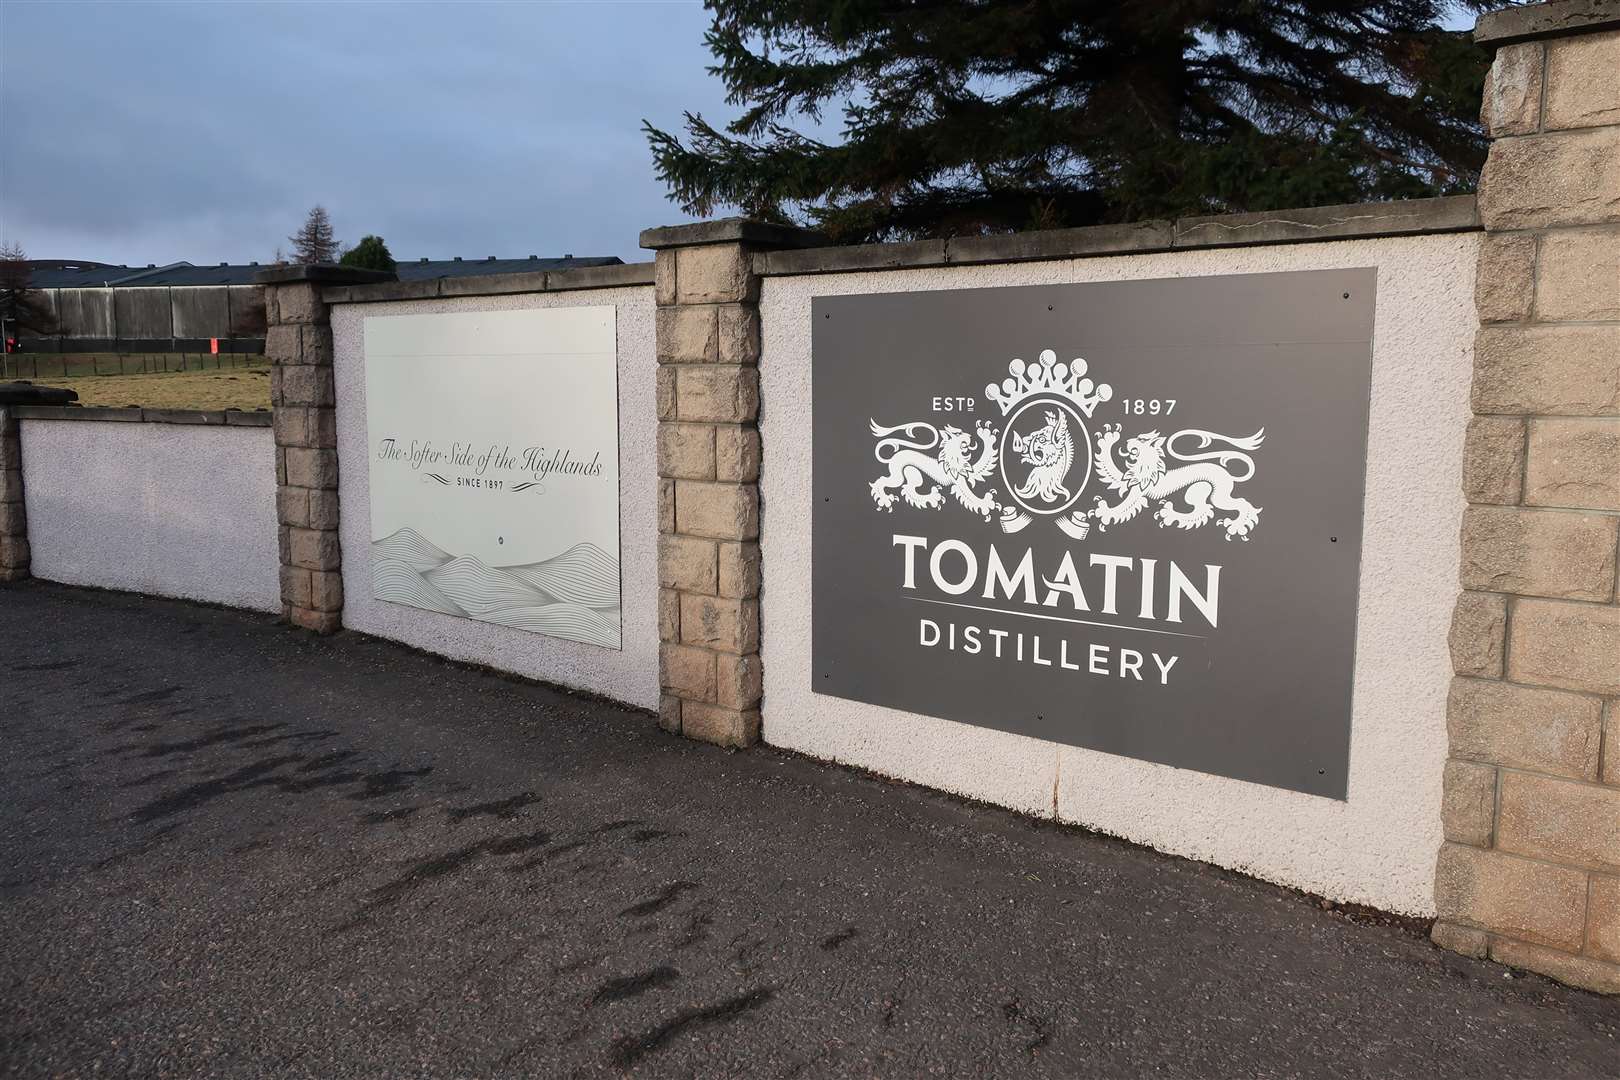 Despite a small drop in turnover, pre-tax profits increased by almost £900,000 for Tomatin Distillery.